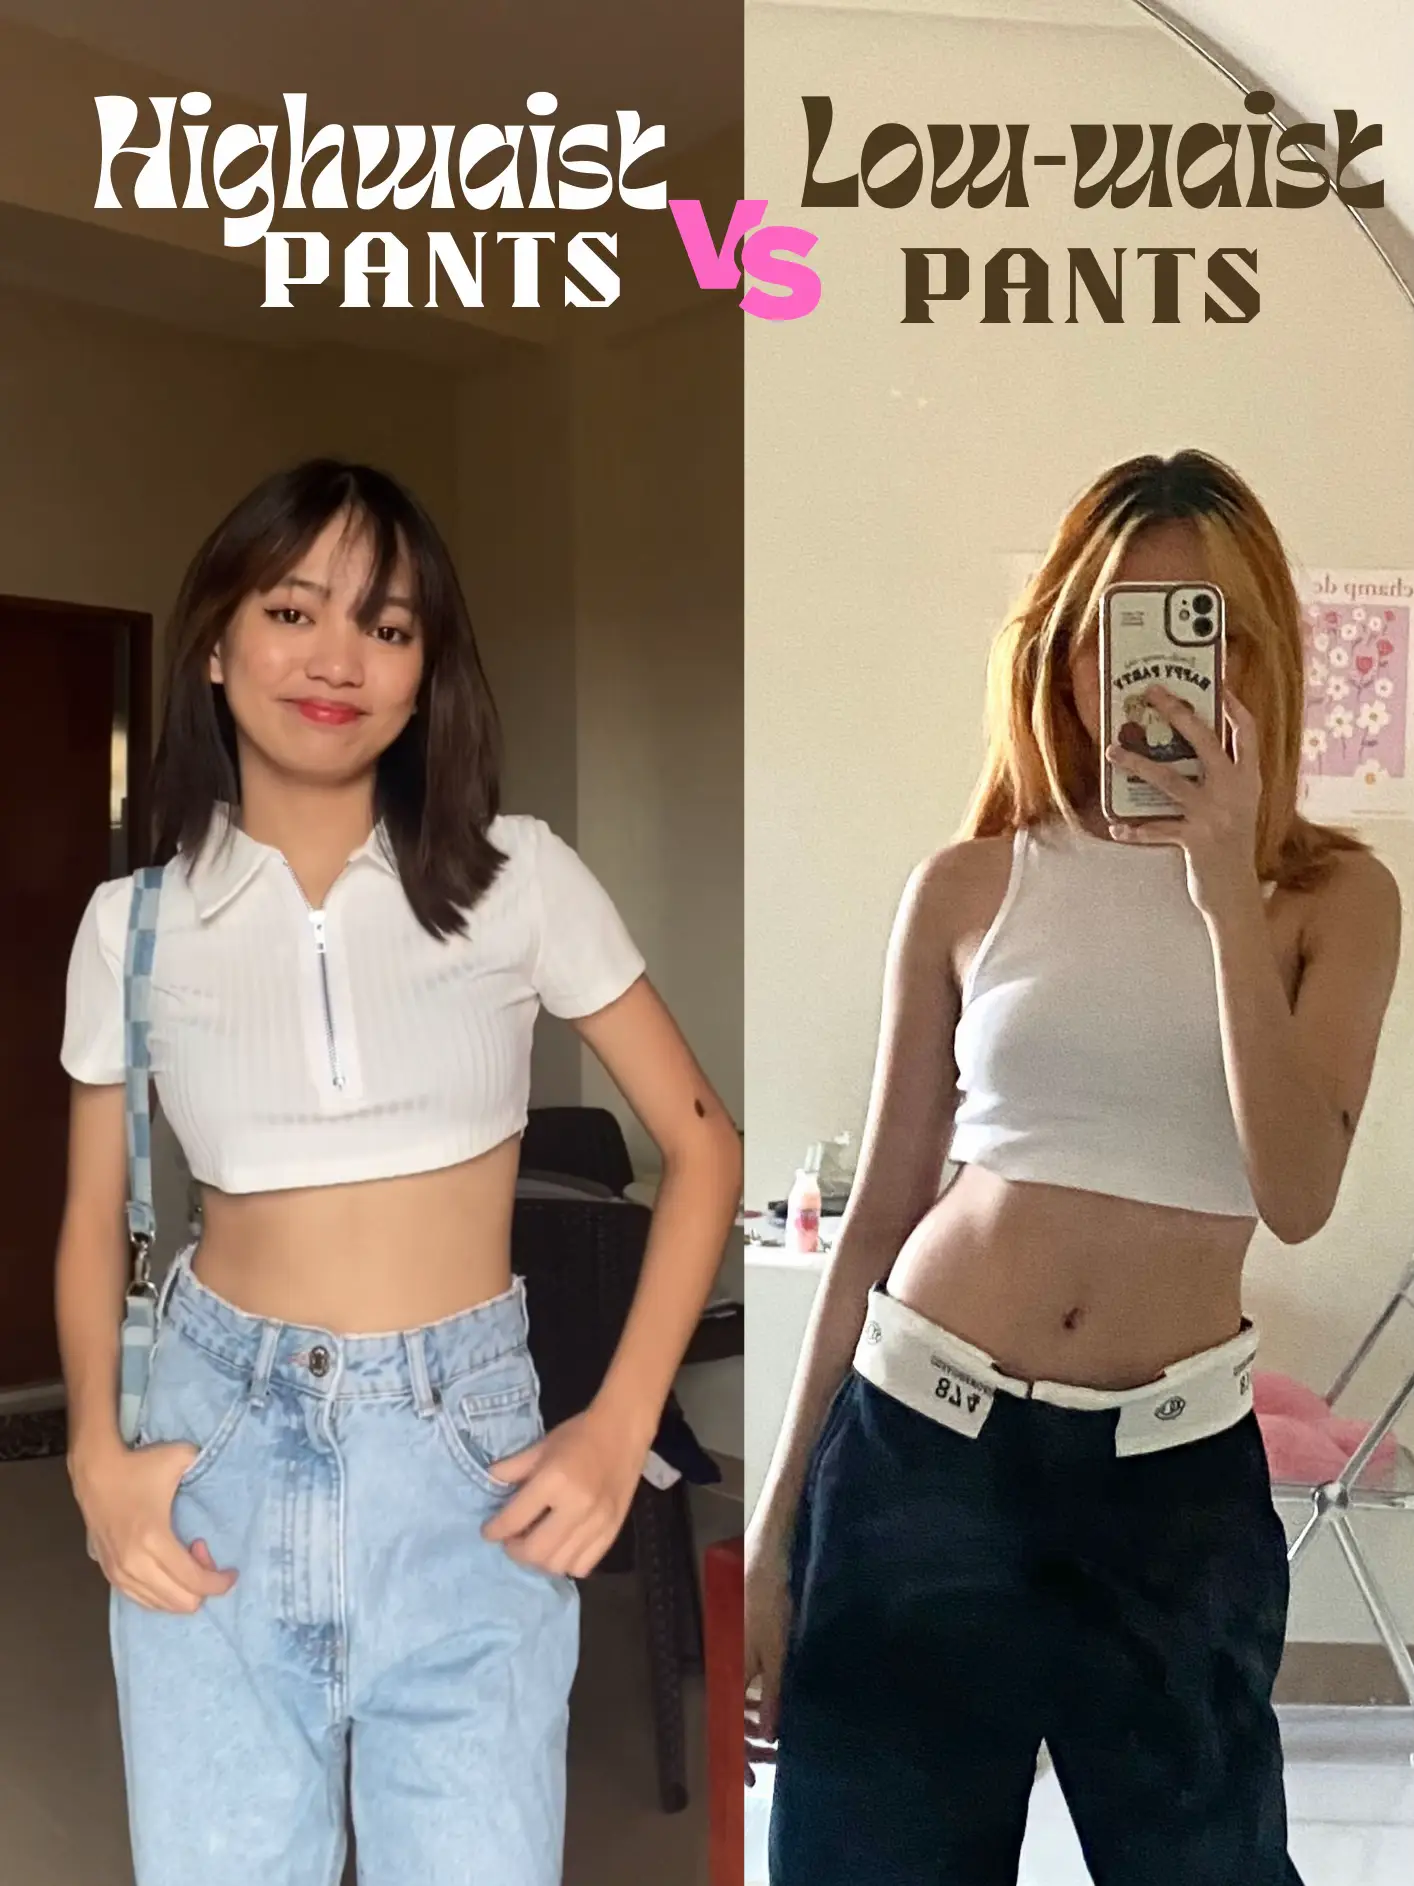 COMPARING HIGH WAIST PANTS VS LOW WAIST PANTS 🌷, Gallery posted by  ayaytha